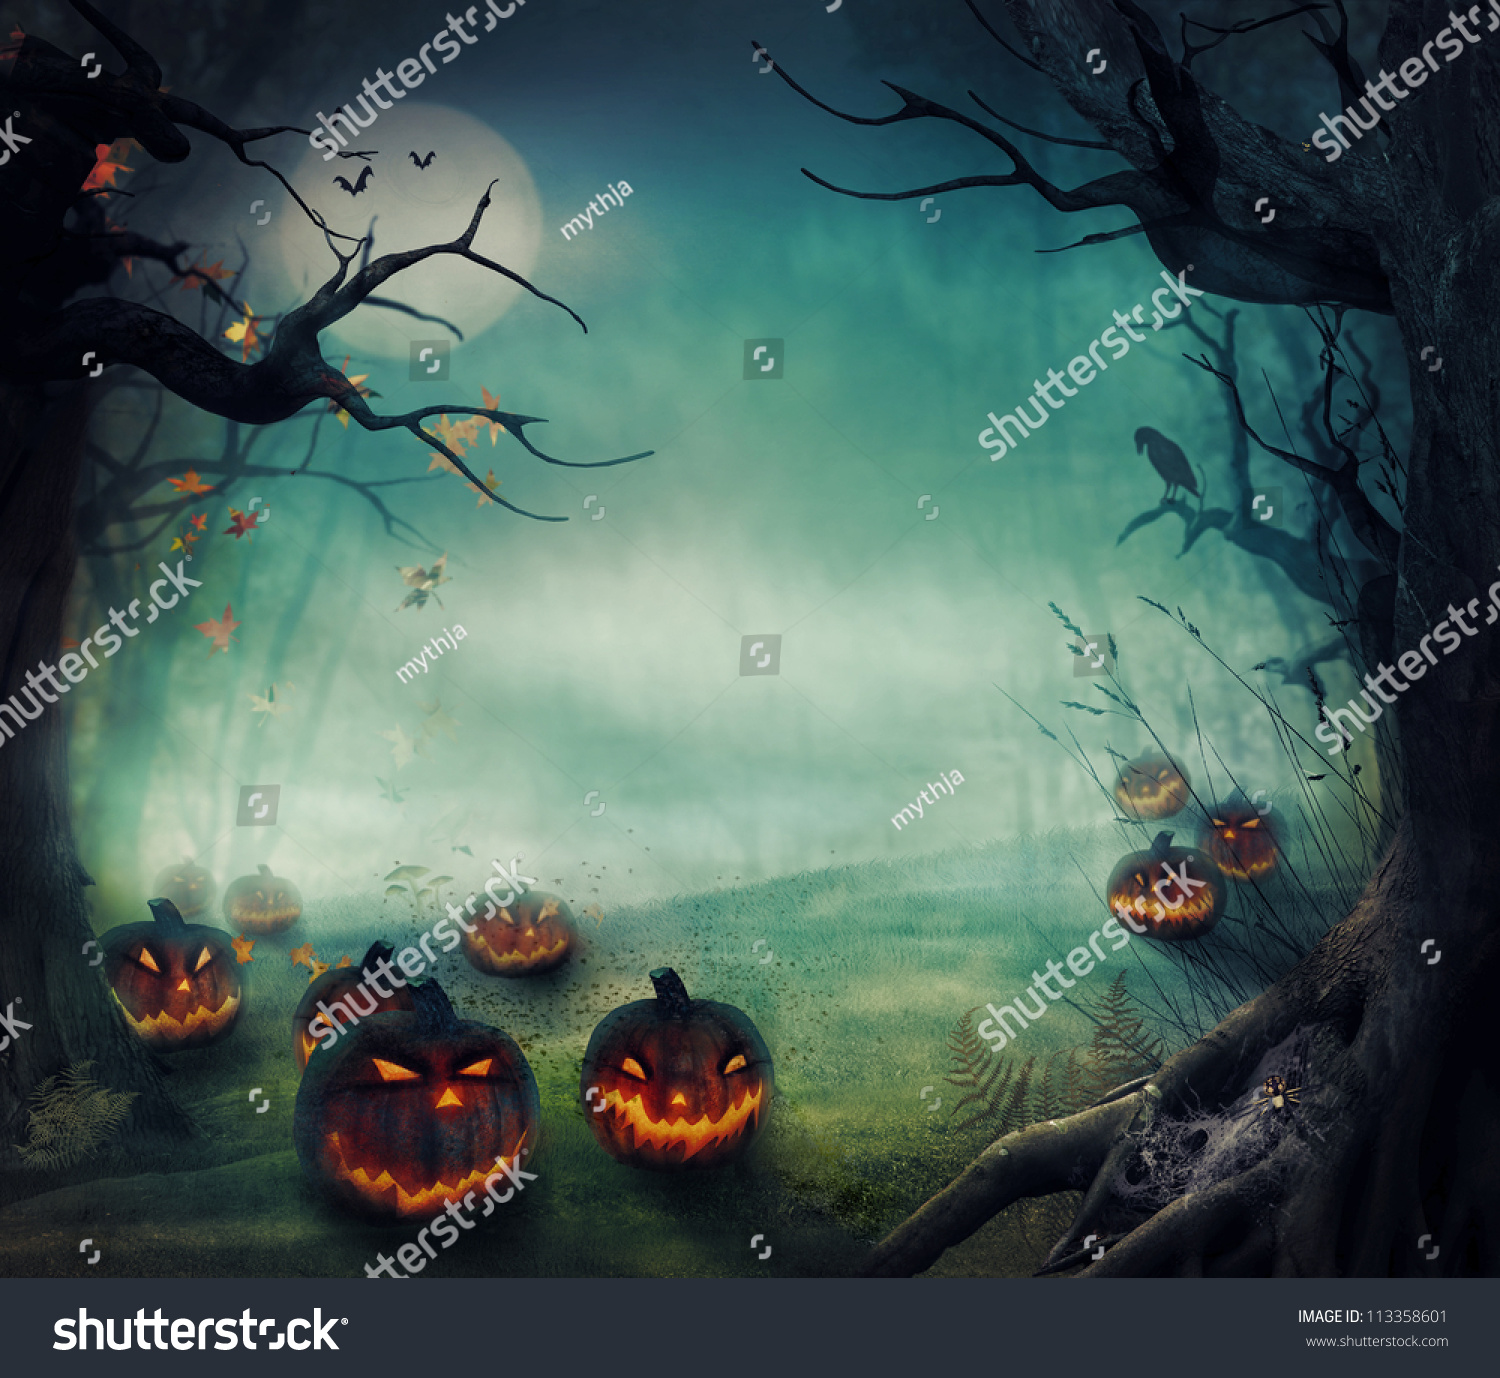 Halloween design - Forest pumpkins. Horror background with autumn valley with woods, spooky tree, pumpkins and spider web. Space for your Halloween holiday text. #113358601